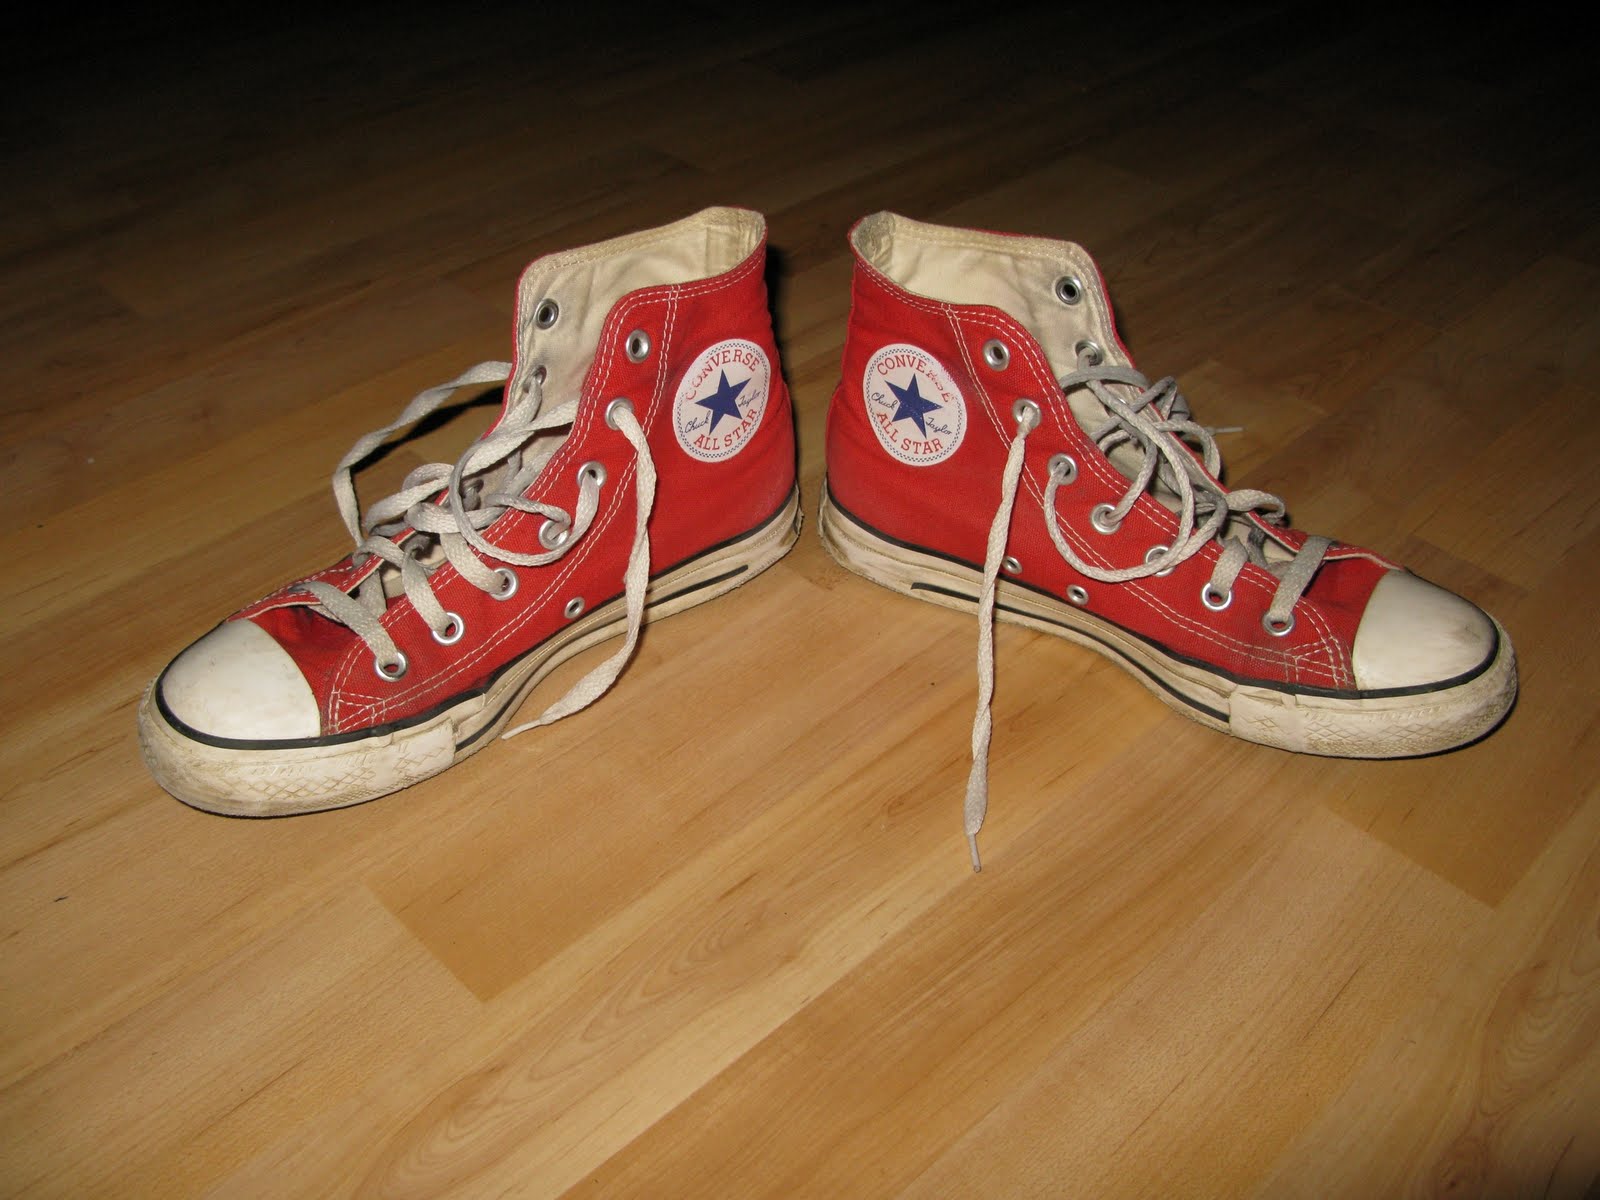 dirty converse shoes